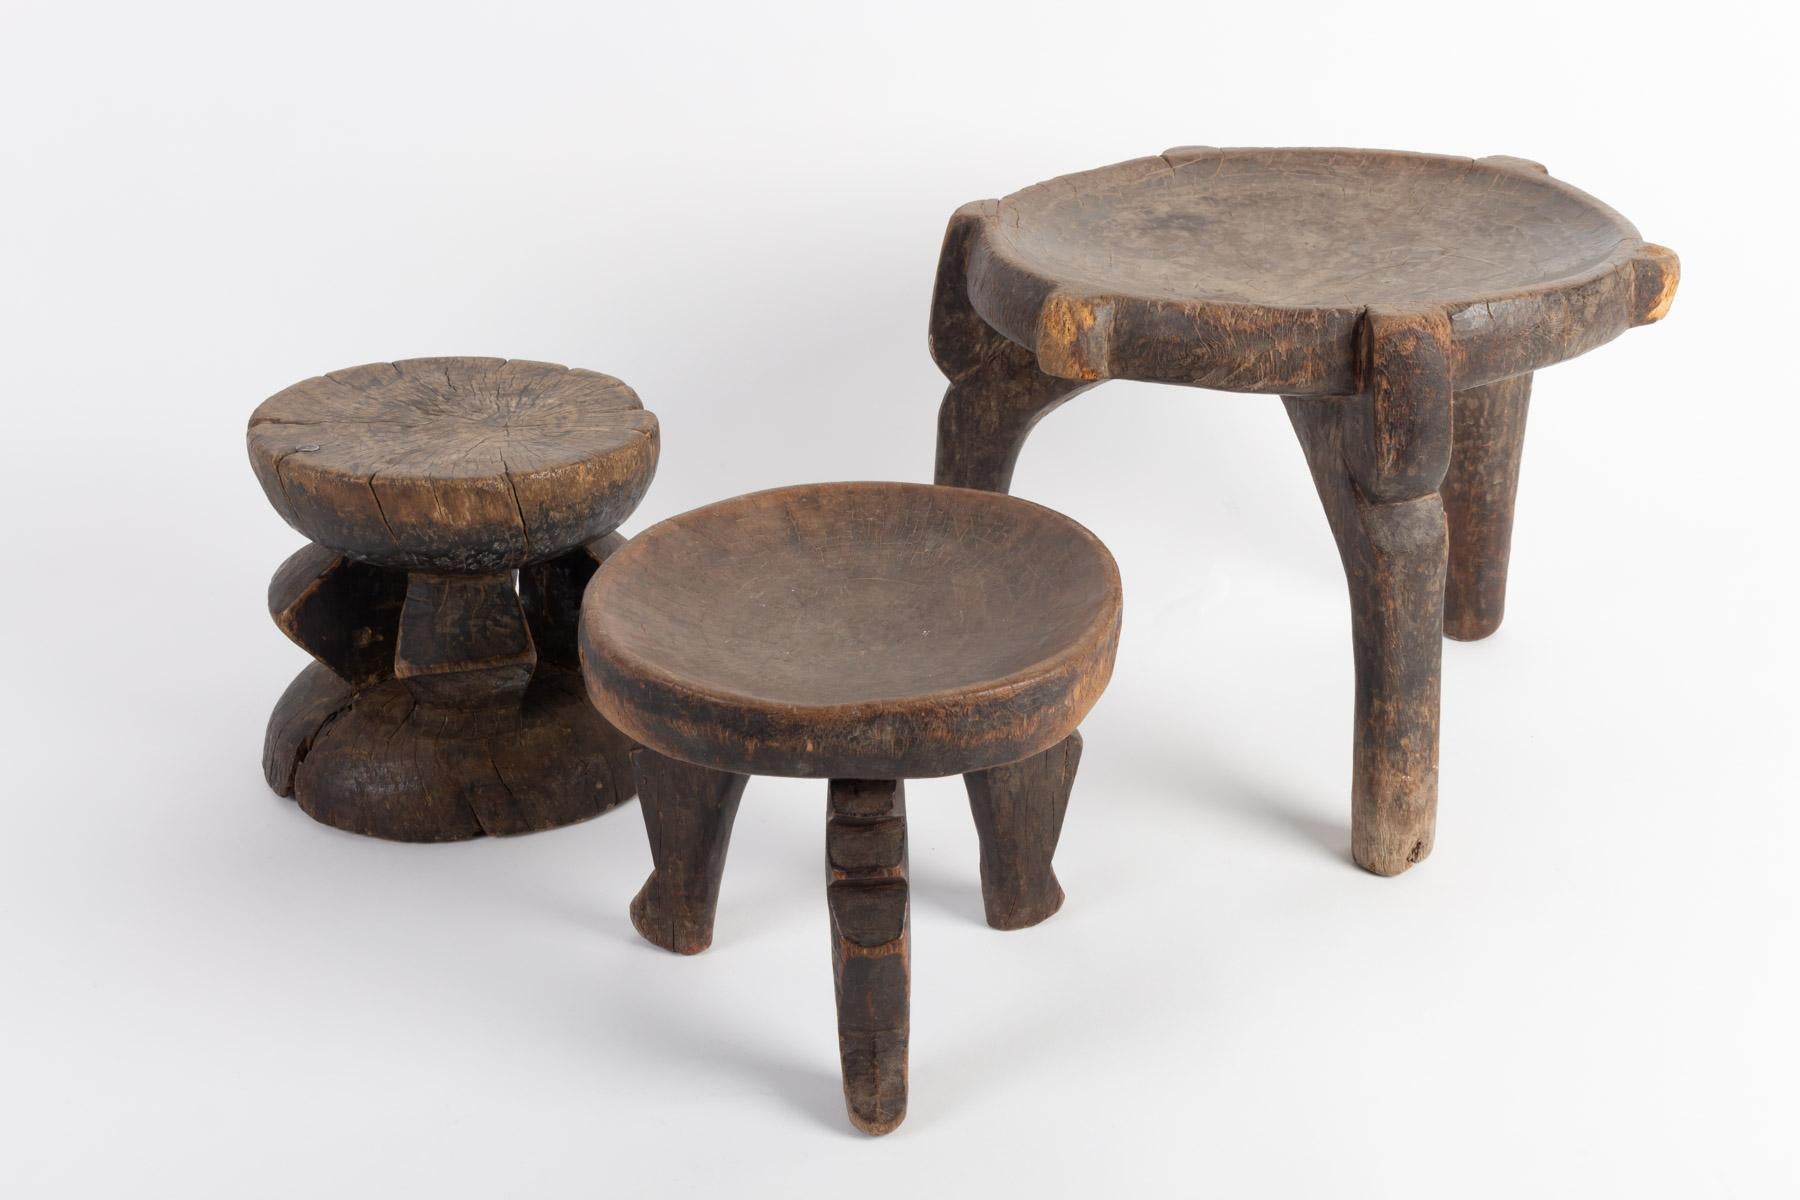 20th Century Africans Wooden Stool and Two Cups